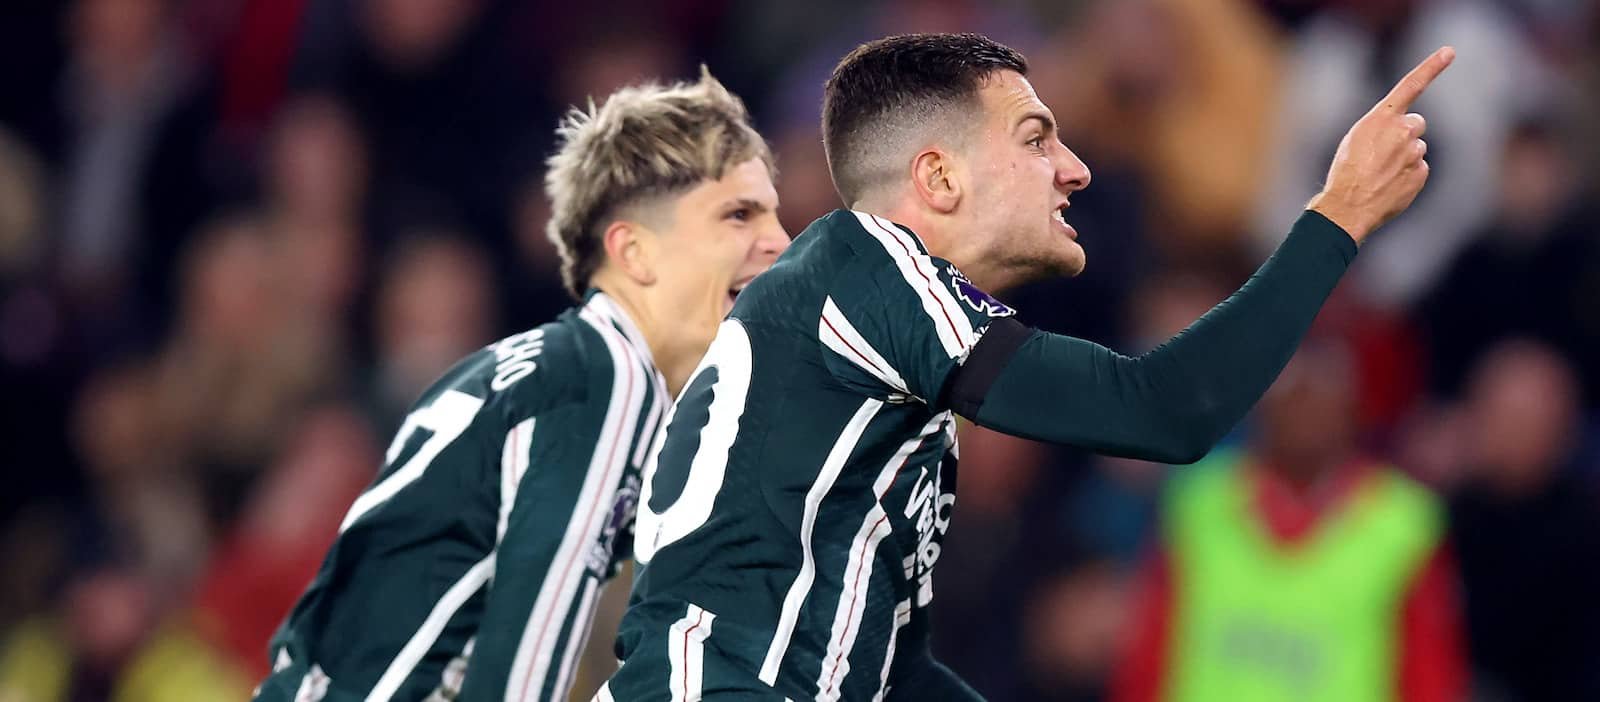 Match winner Diogo Dalot proved clinical in Manchester United’s narrow win of Sheffield United – Man United News And Transfer News